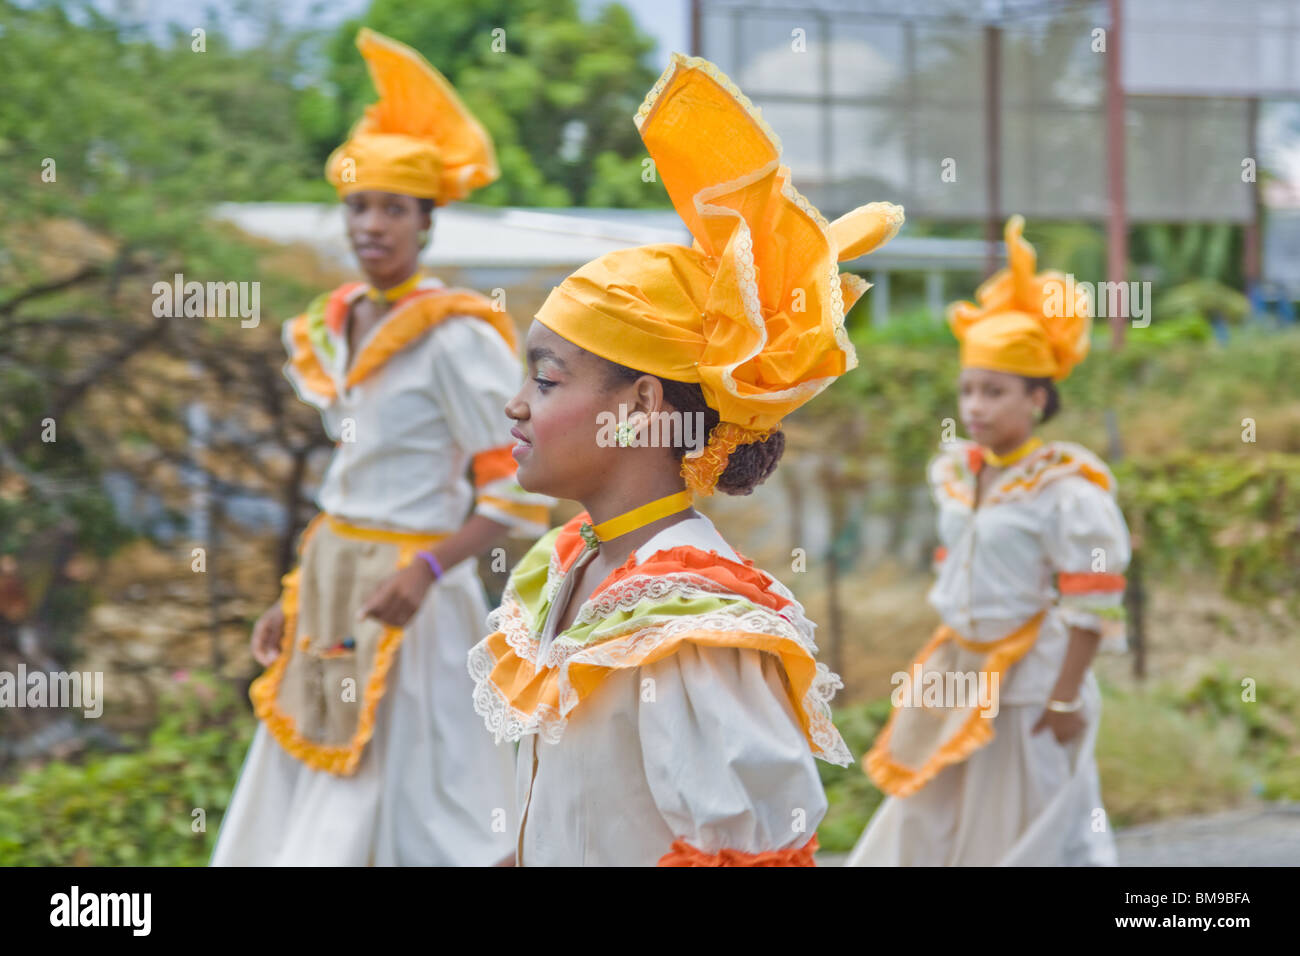 Young girl dressed in colorful costumes dance during Harvest Festival, Willemstad, Curacao, Netherlands Antilles, Caribbean. Stock Photo